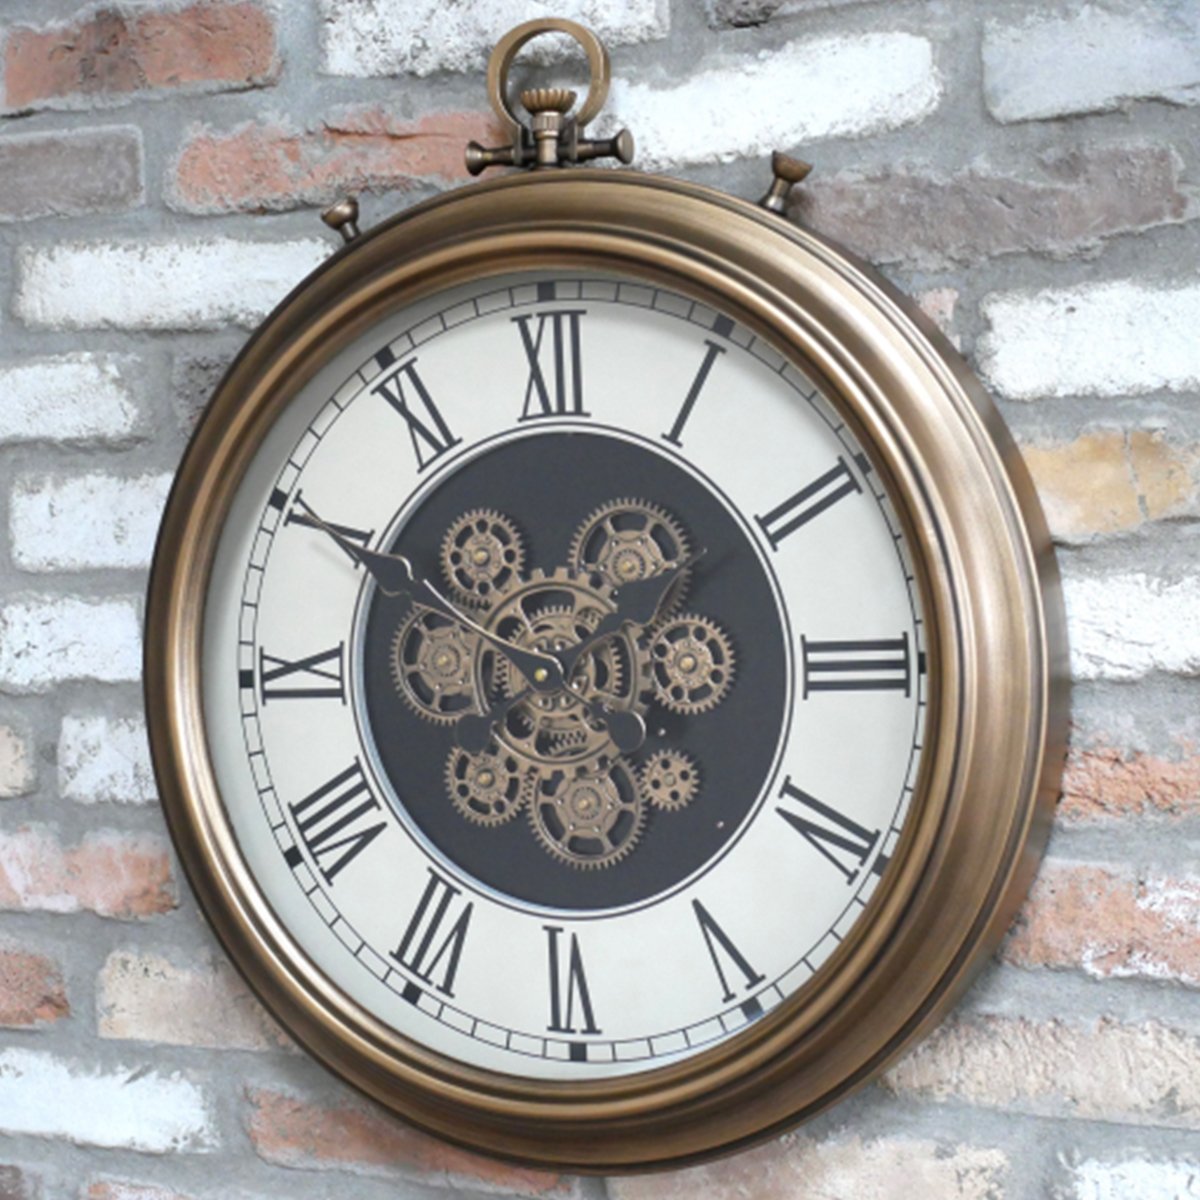 Gold, Black and White Pocket Watch Style Clock